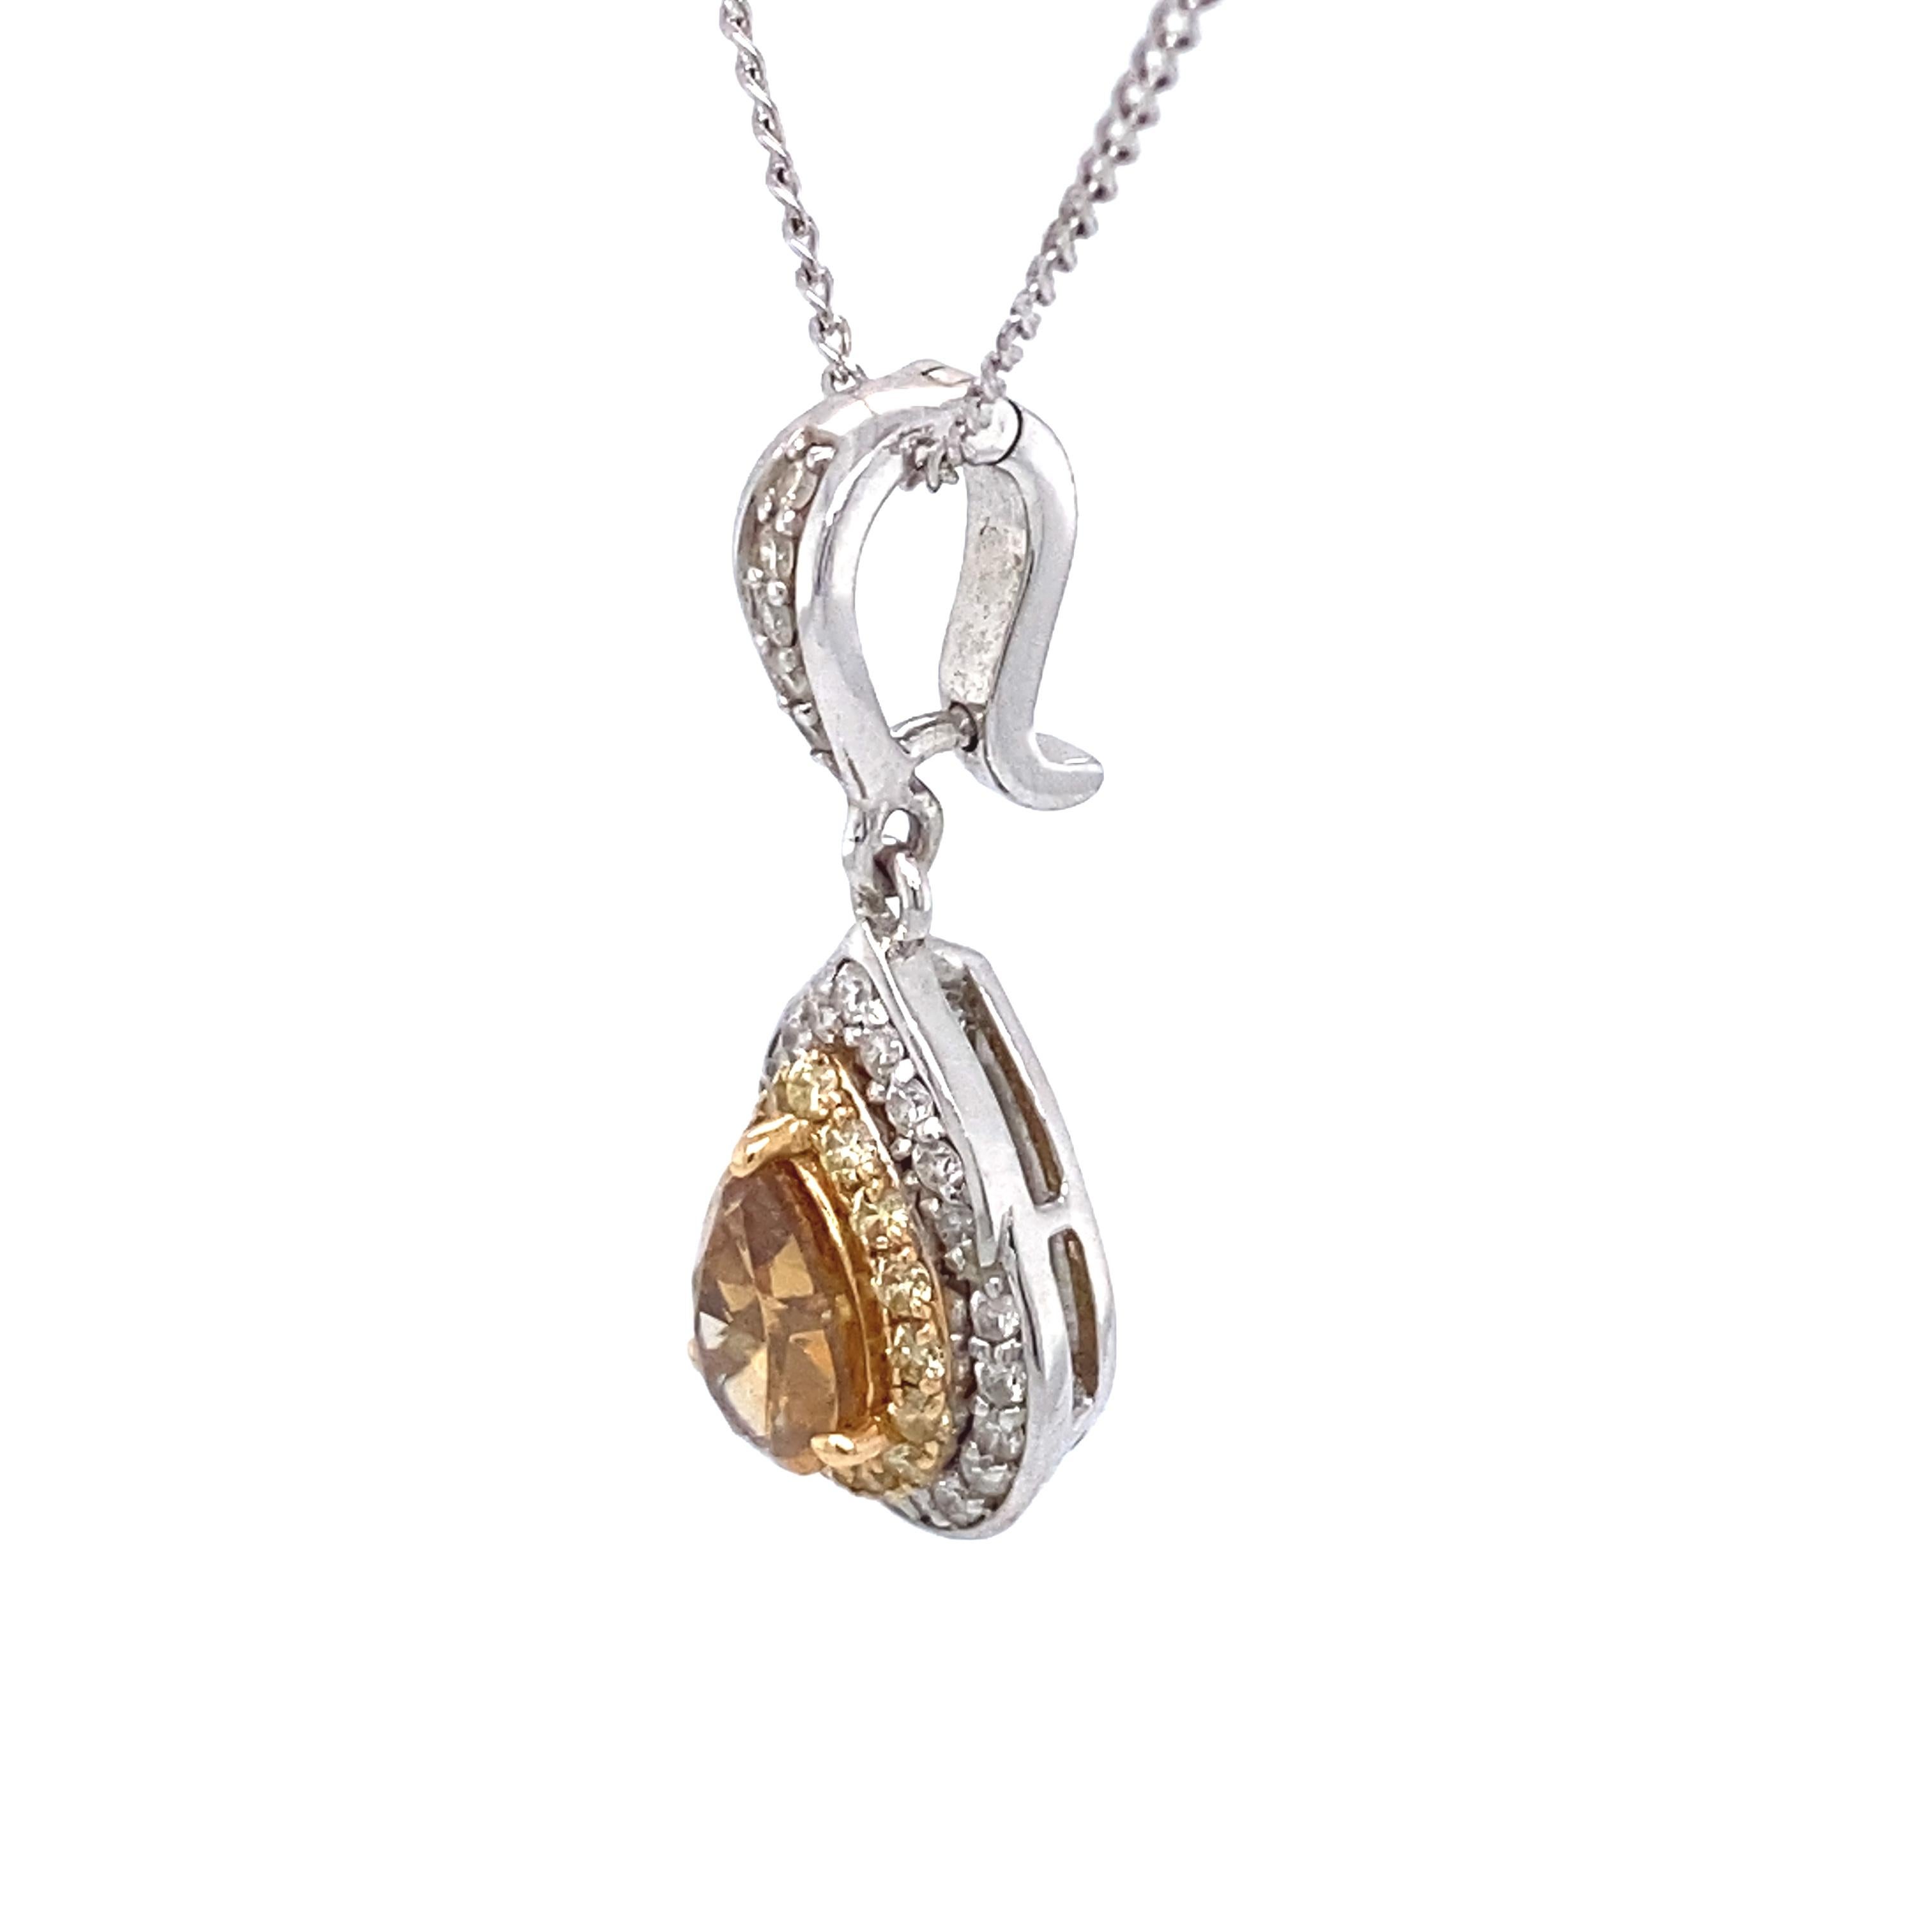 1.82 Carat Total Fancy Brown, Yellow and White Diamond Pendant in 18K White Gold In Excellent Condition For Sale In Atlanta, GA